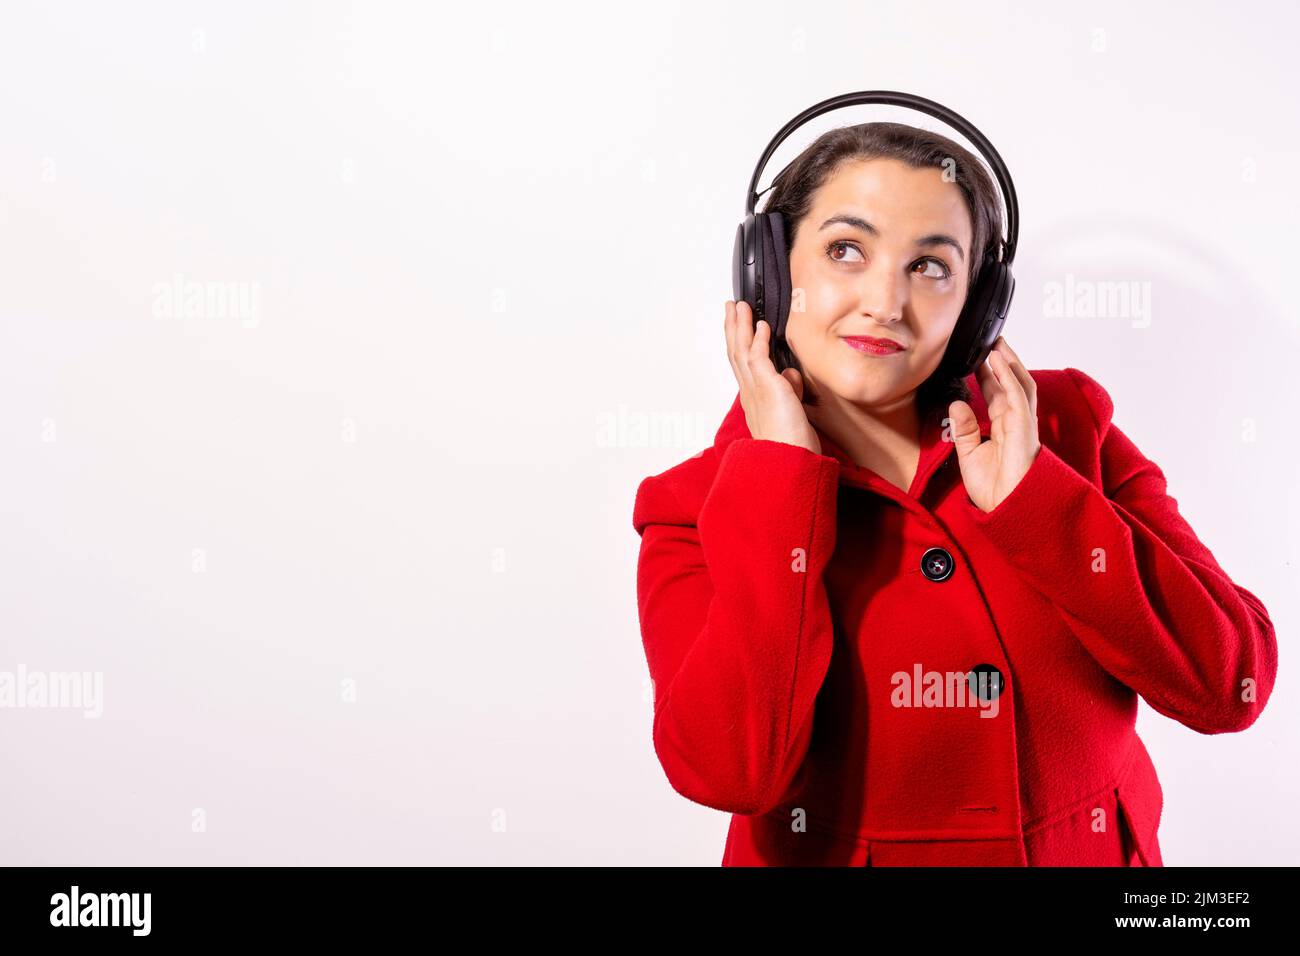 Girl with red coat and headphones listening to music. white background Stock Photo